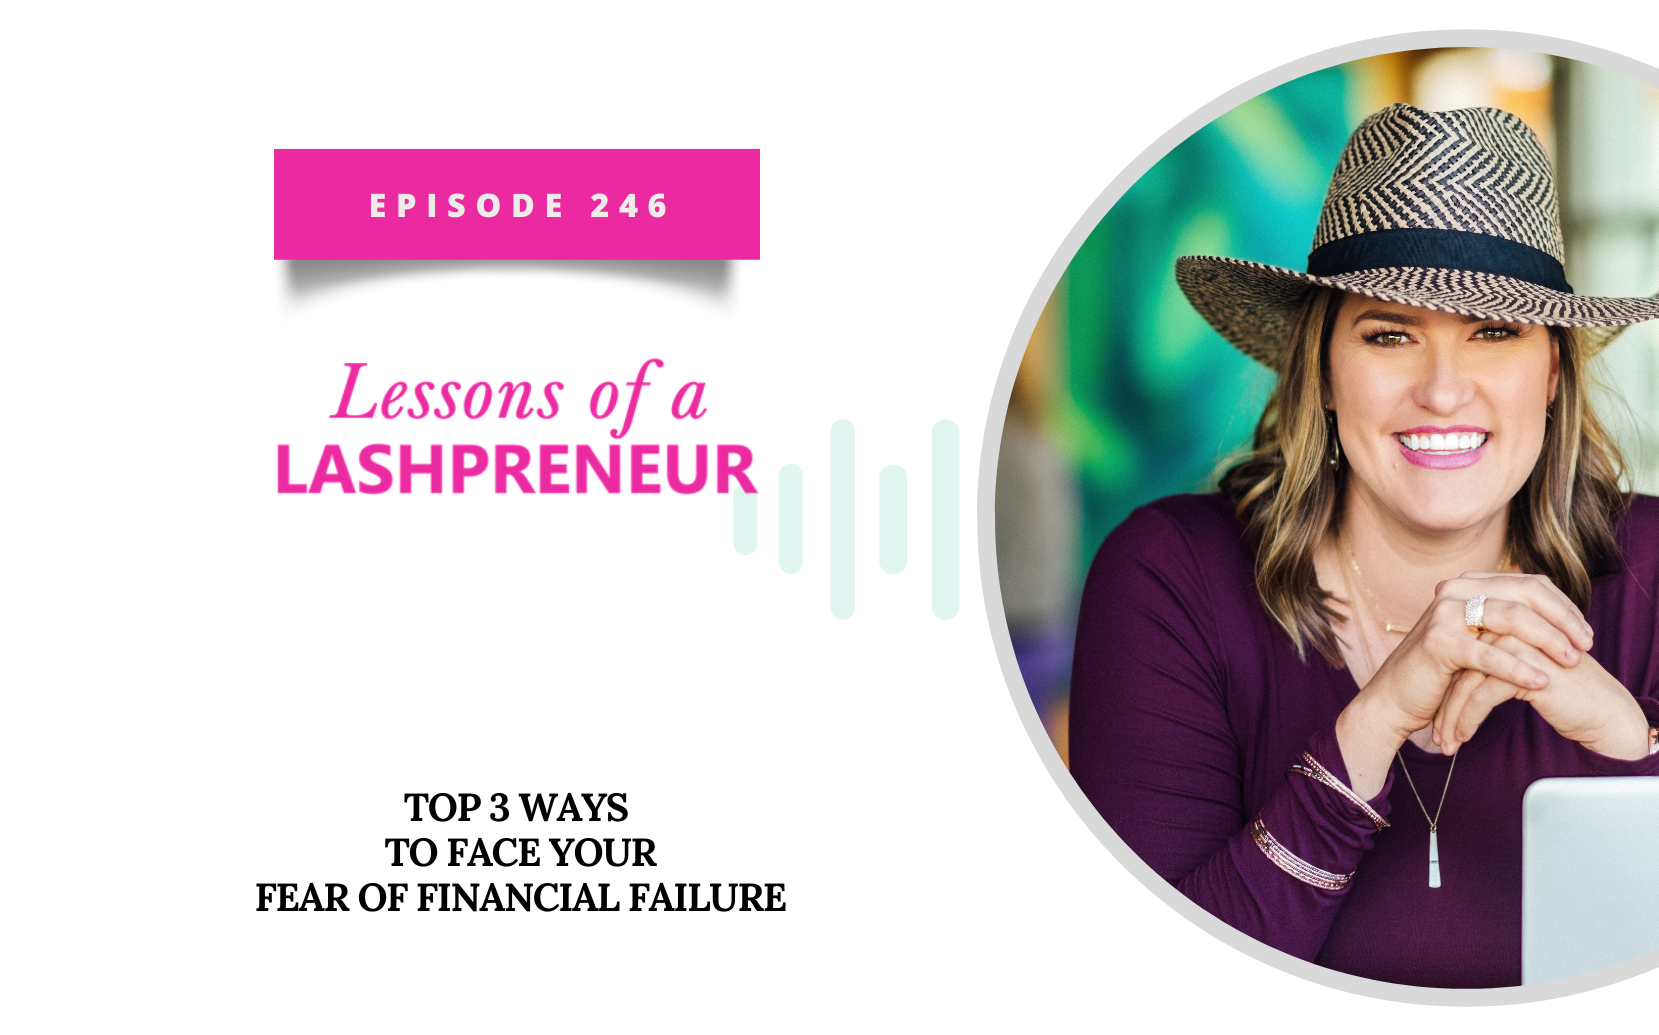 Top 3 Ways to Face Your Fear of Financial Failure